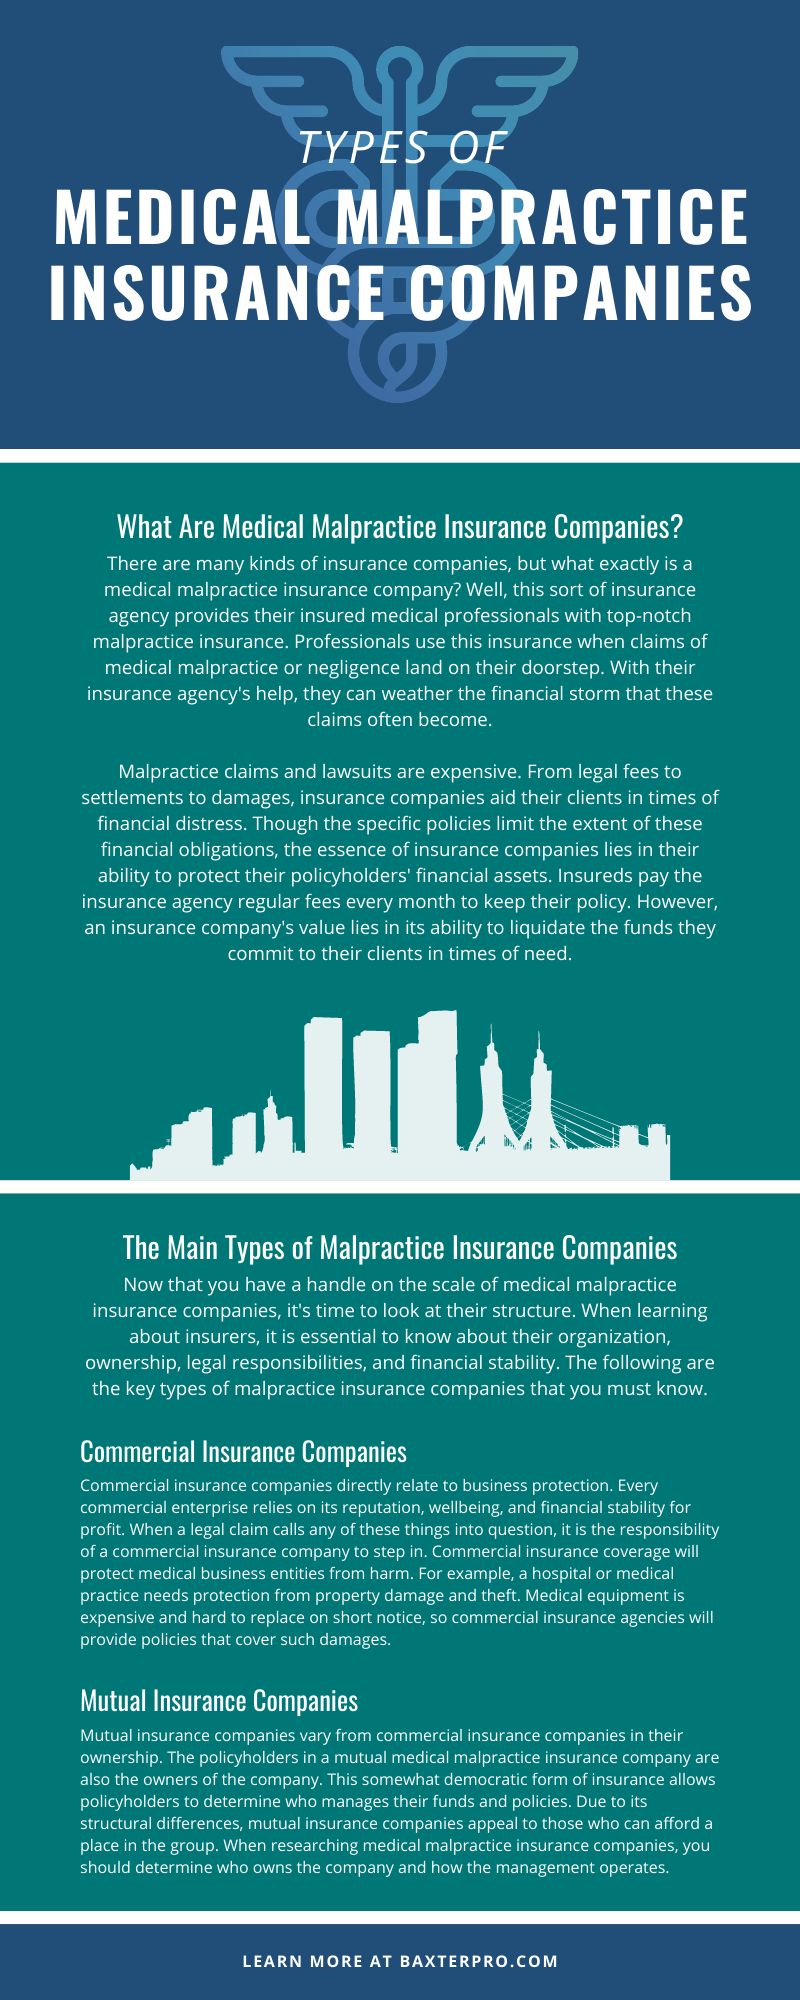 Types of Medical Malpractice Insurance Companies